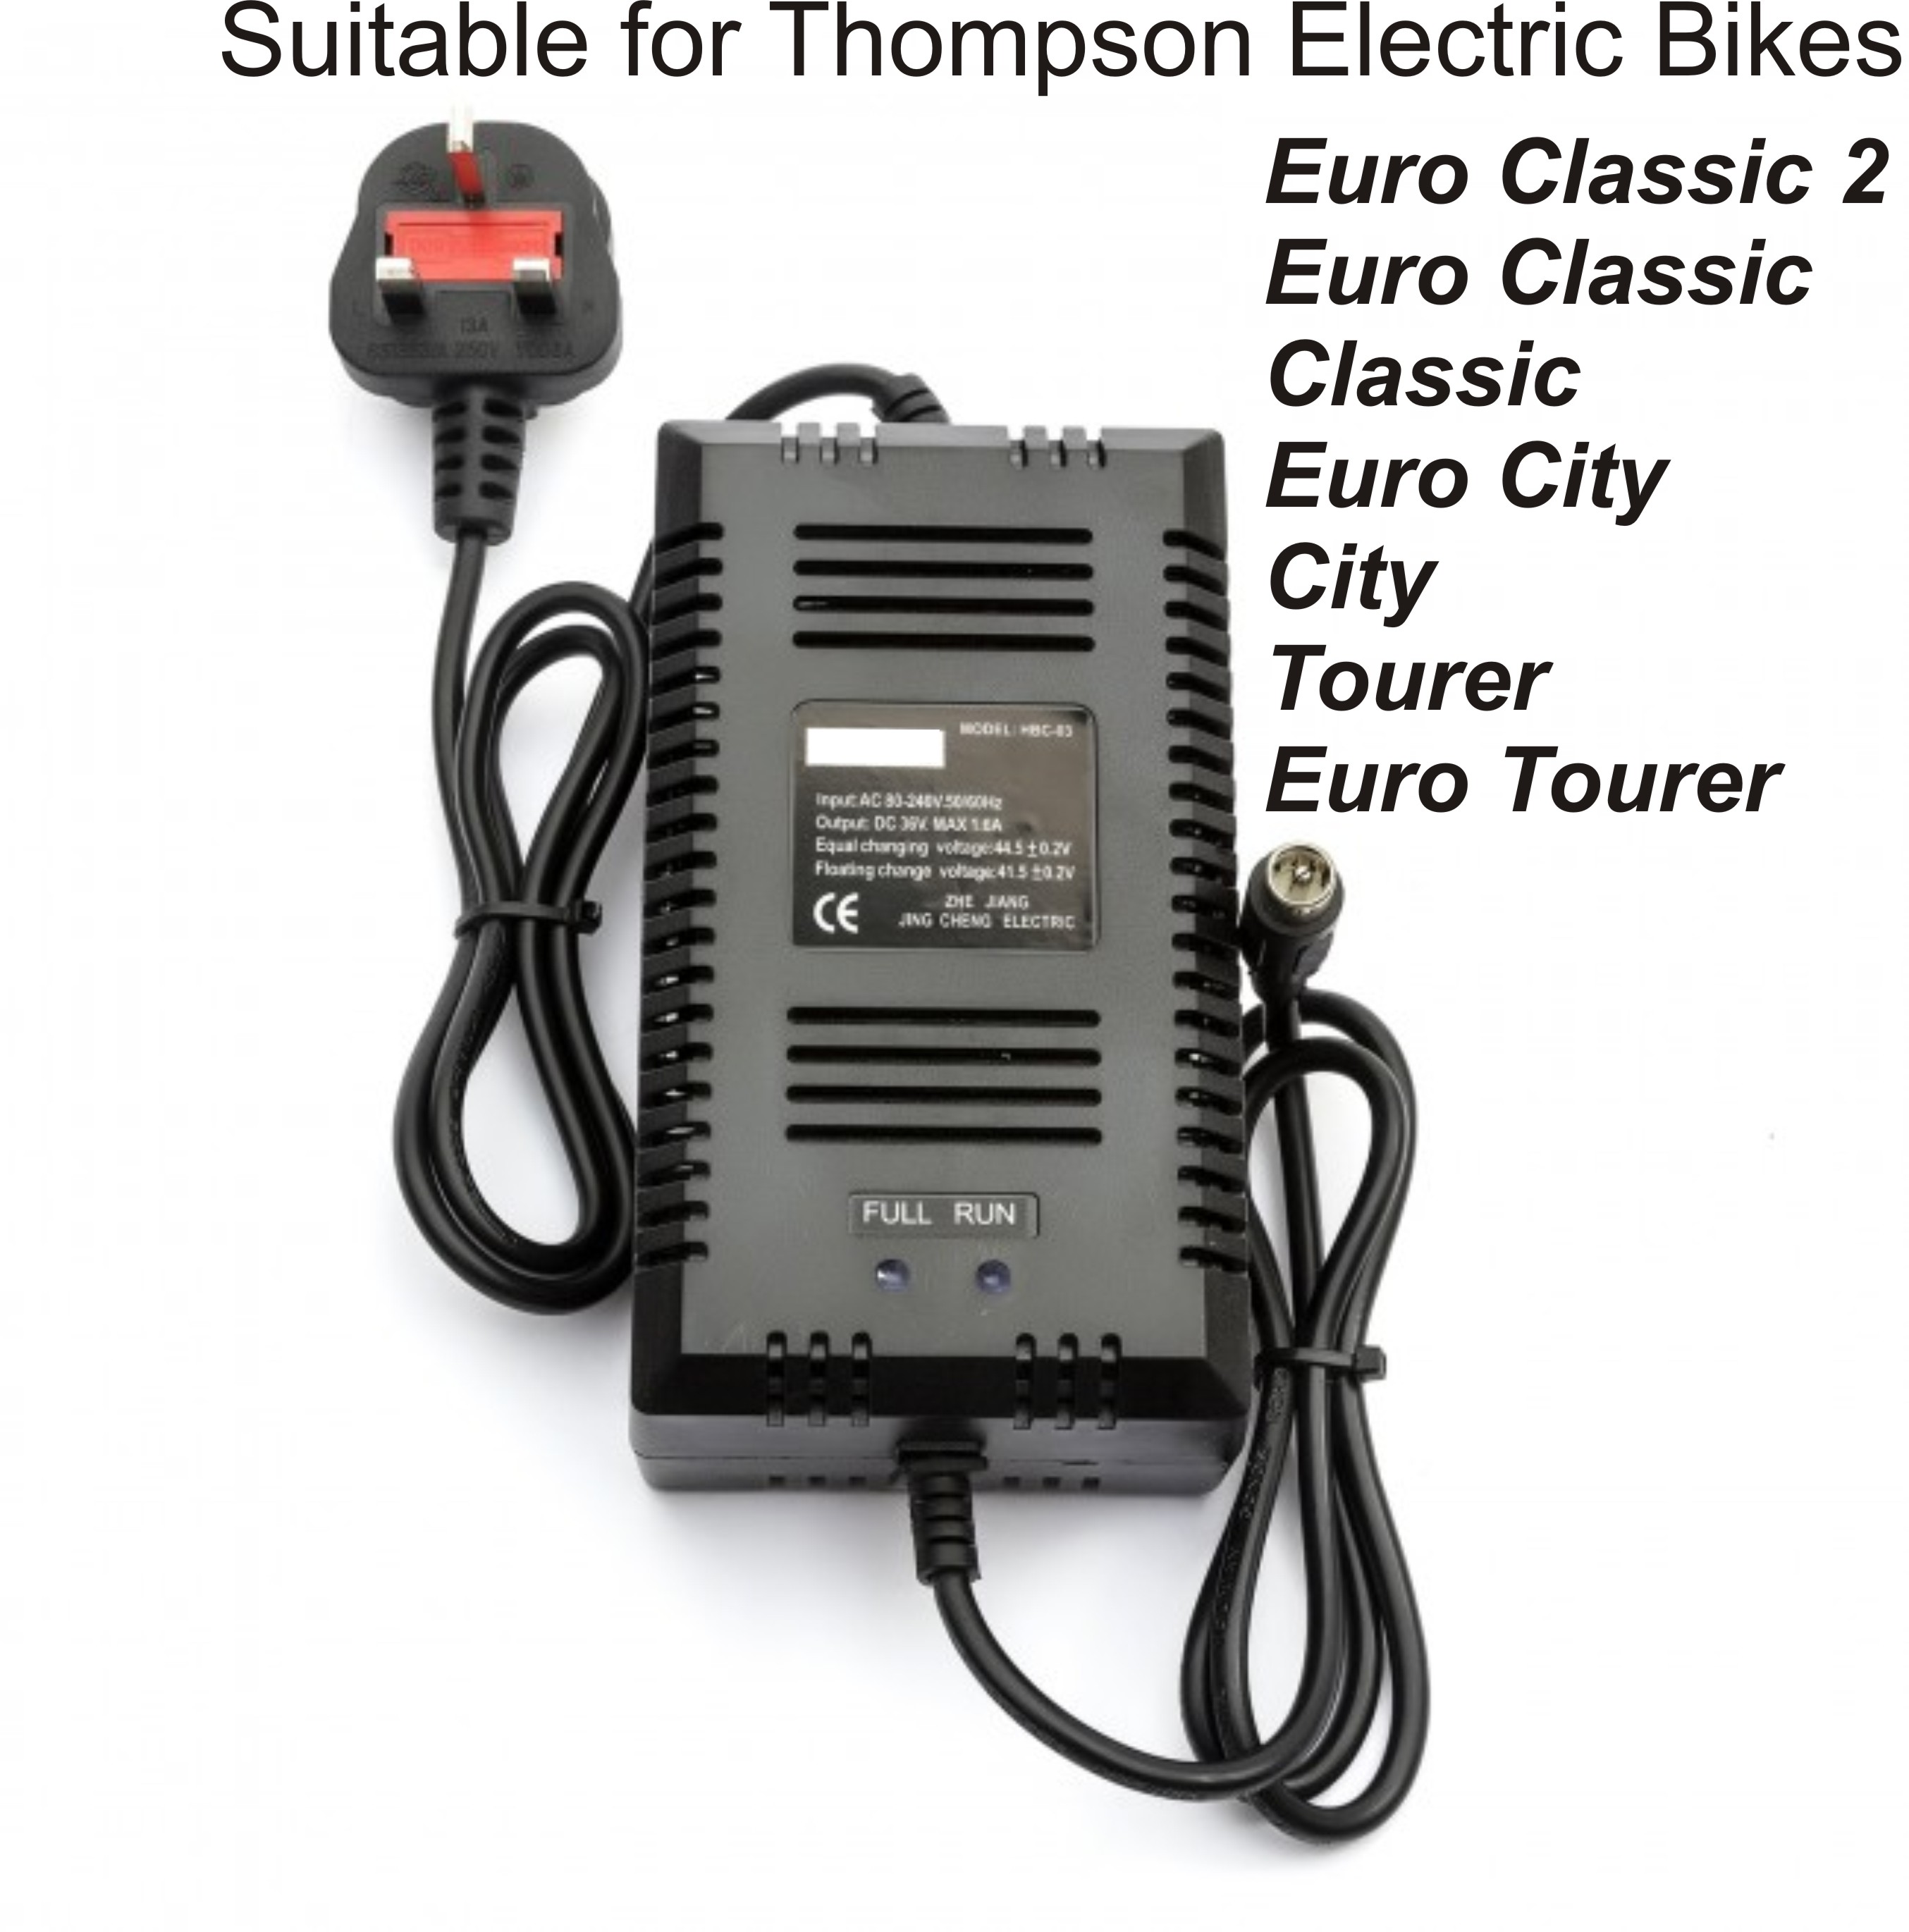 Battery Charger for Thompson Euro Classic 2, City & Tourer Bikes